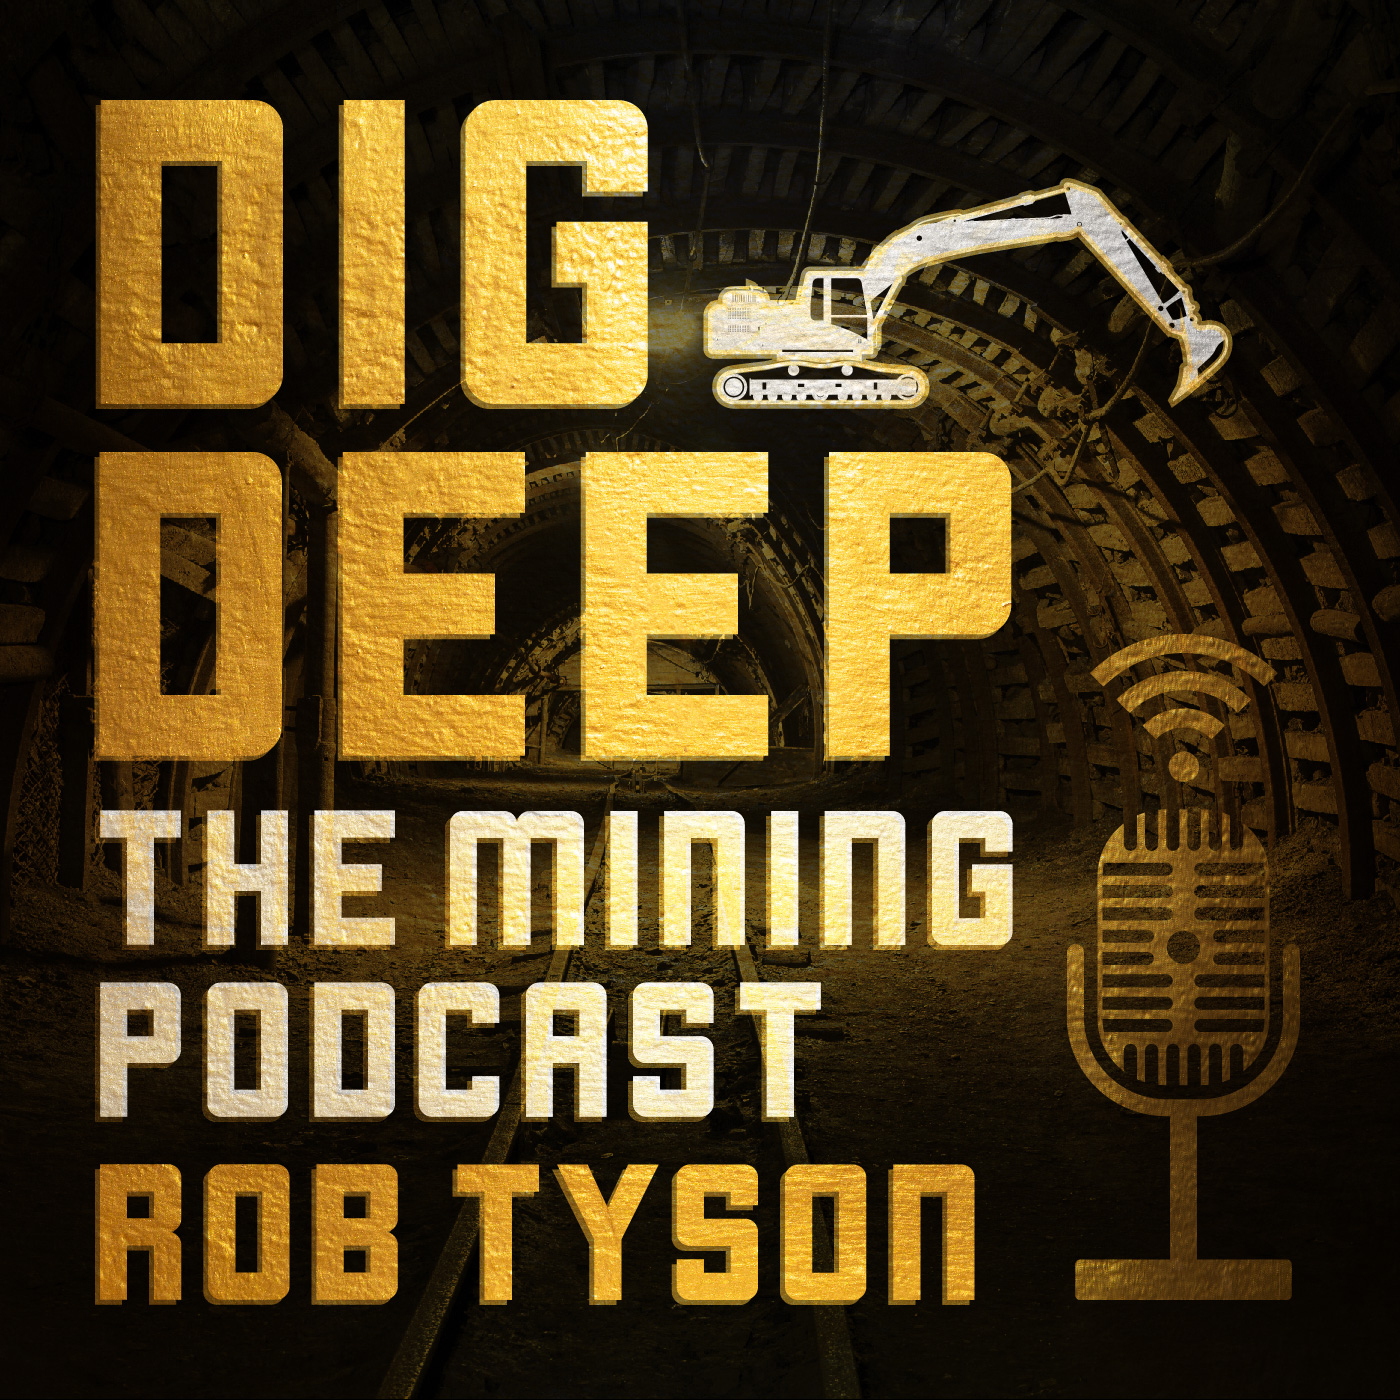 Mining Gold And Copper in The Pilbara Area With Alastair Clayton